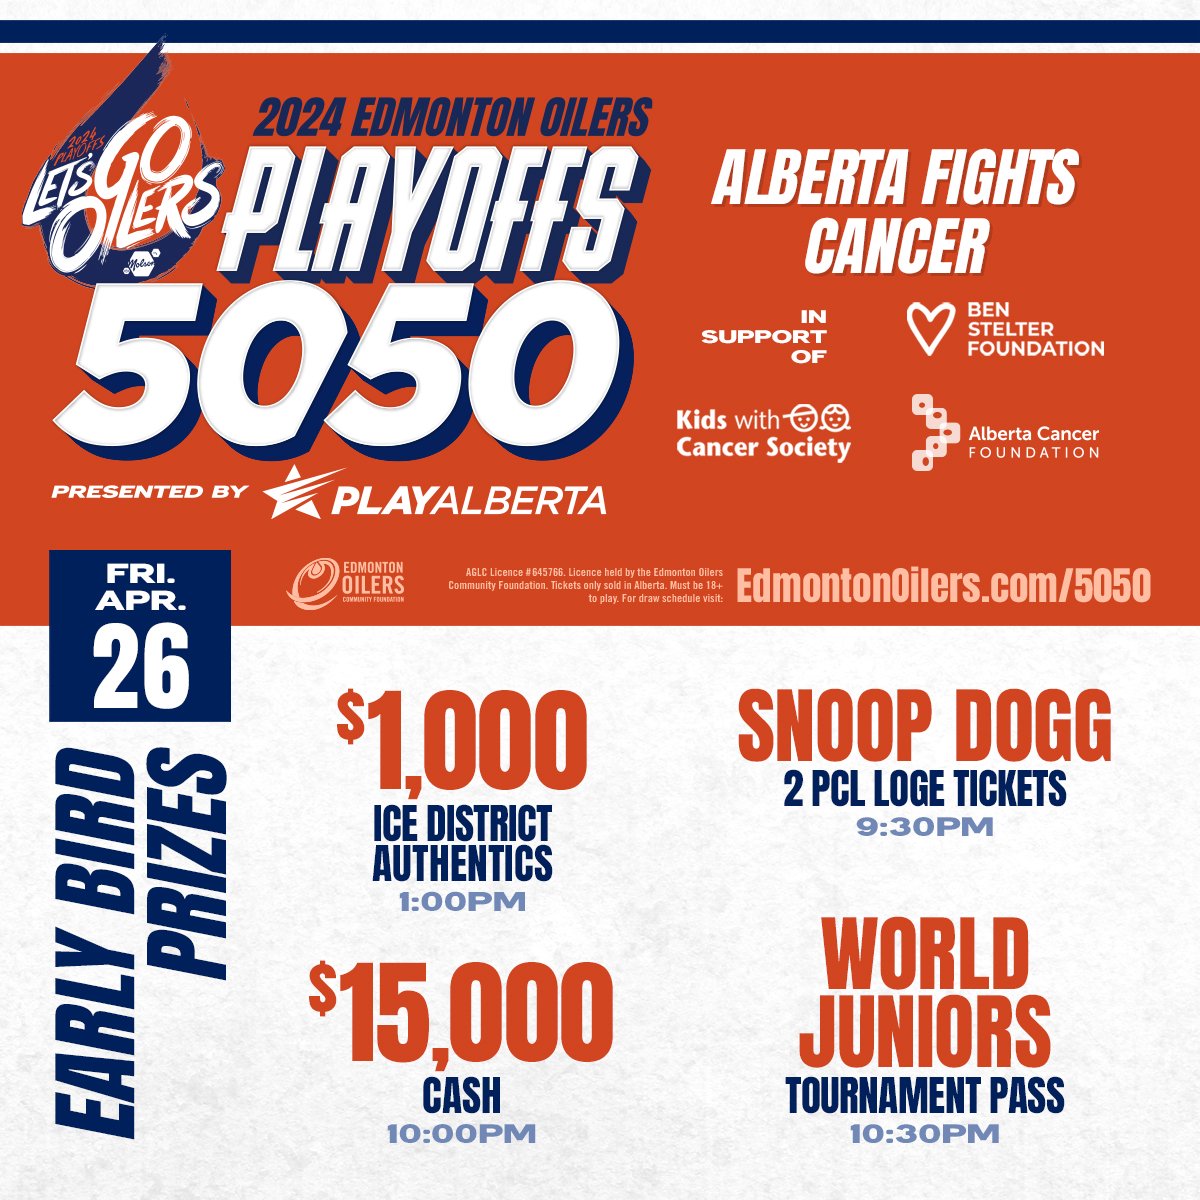 Congrats to the holder of #Oilers Playoffs 50/50 ticket A-100556881 who's won $1,000 for @IceDistrictAuth with today's first early-bird draw! You could win $15,000 cash later tonight & the jackpot is already over $300,000! 🤯 🎟 EdmontonOilers.com/5050tw